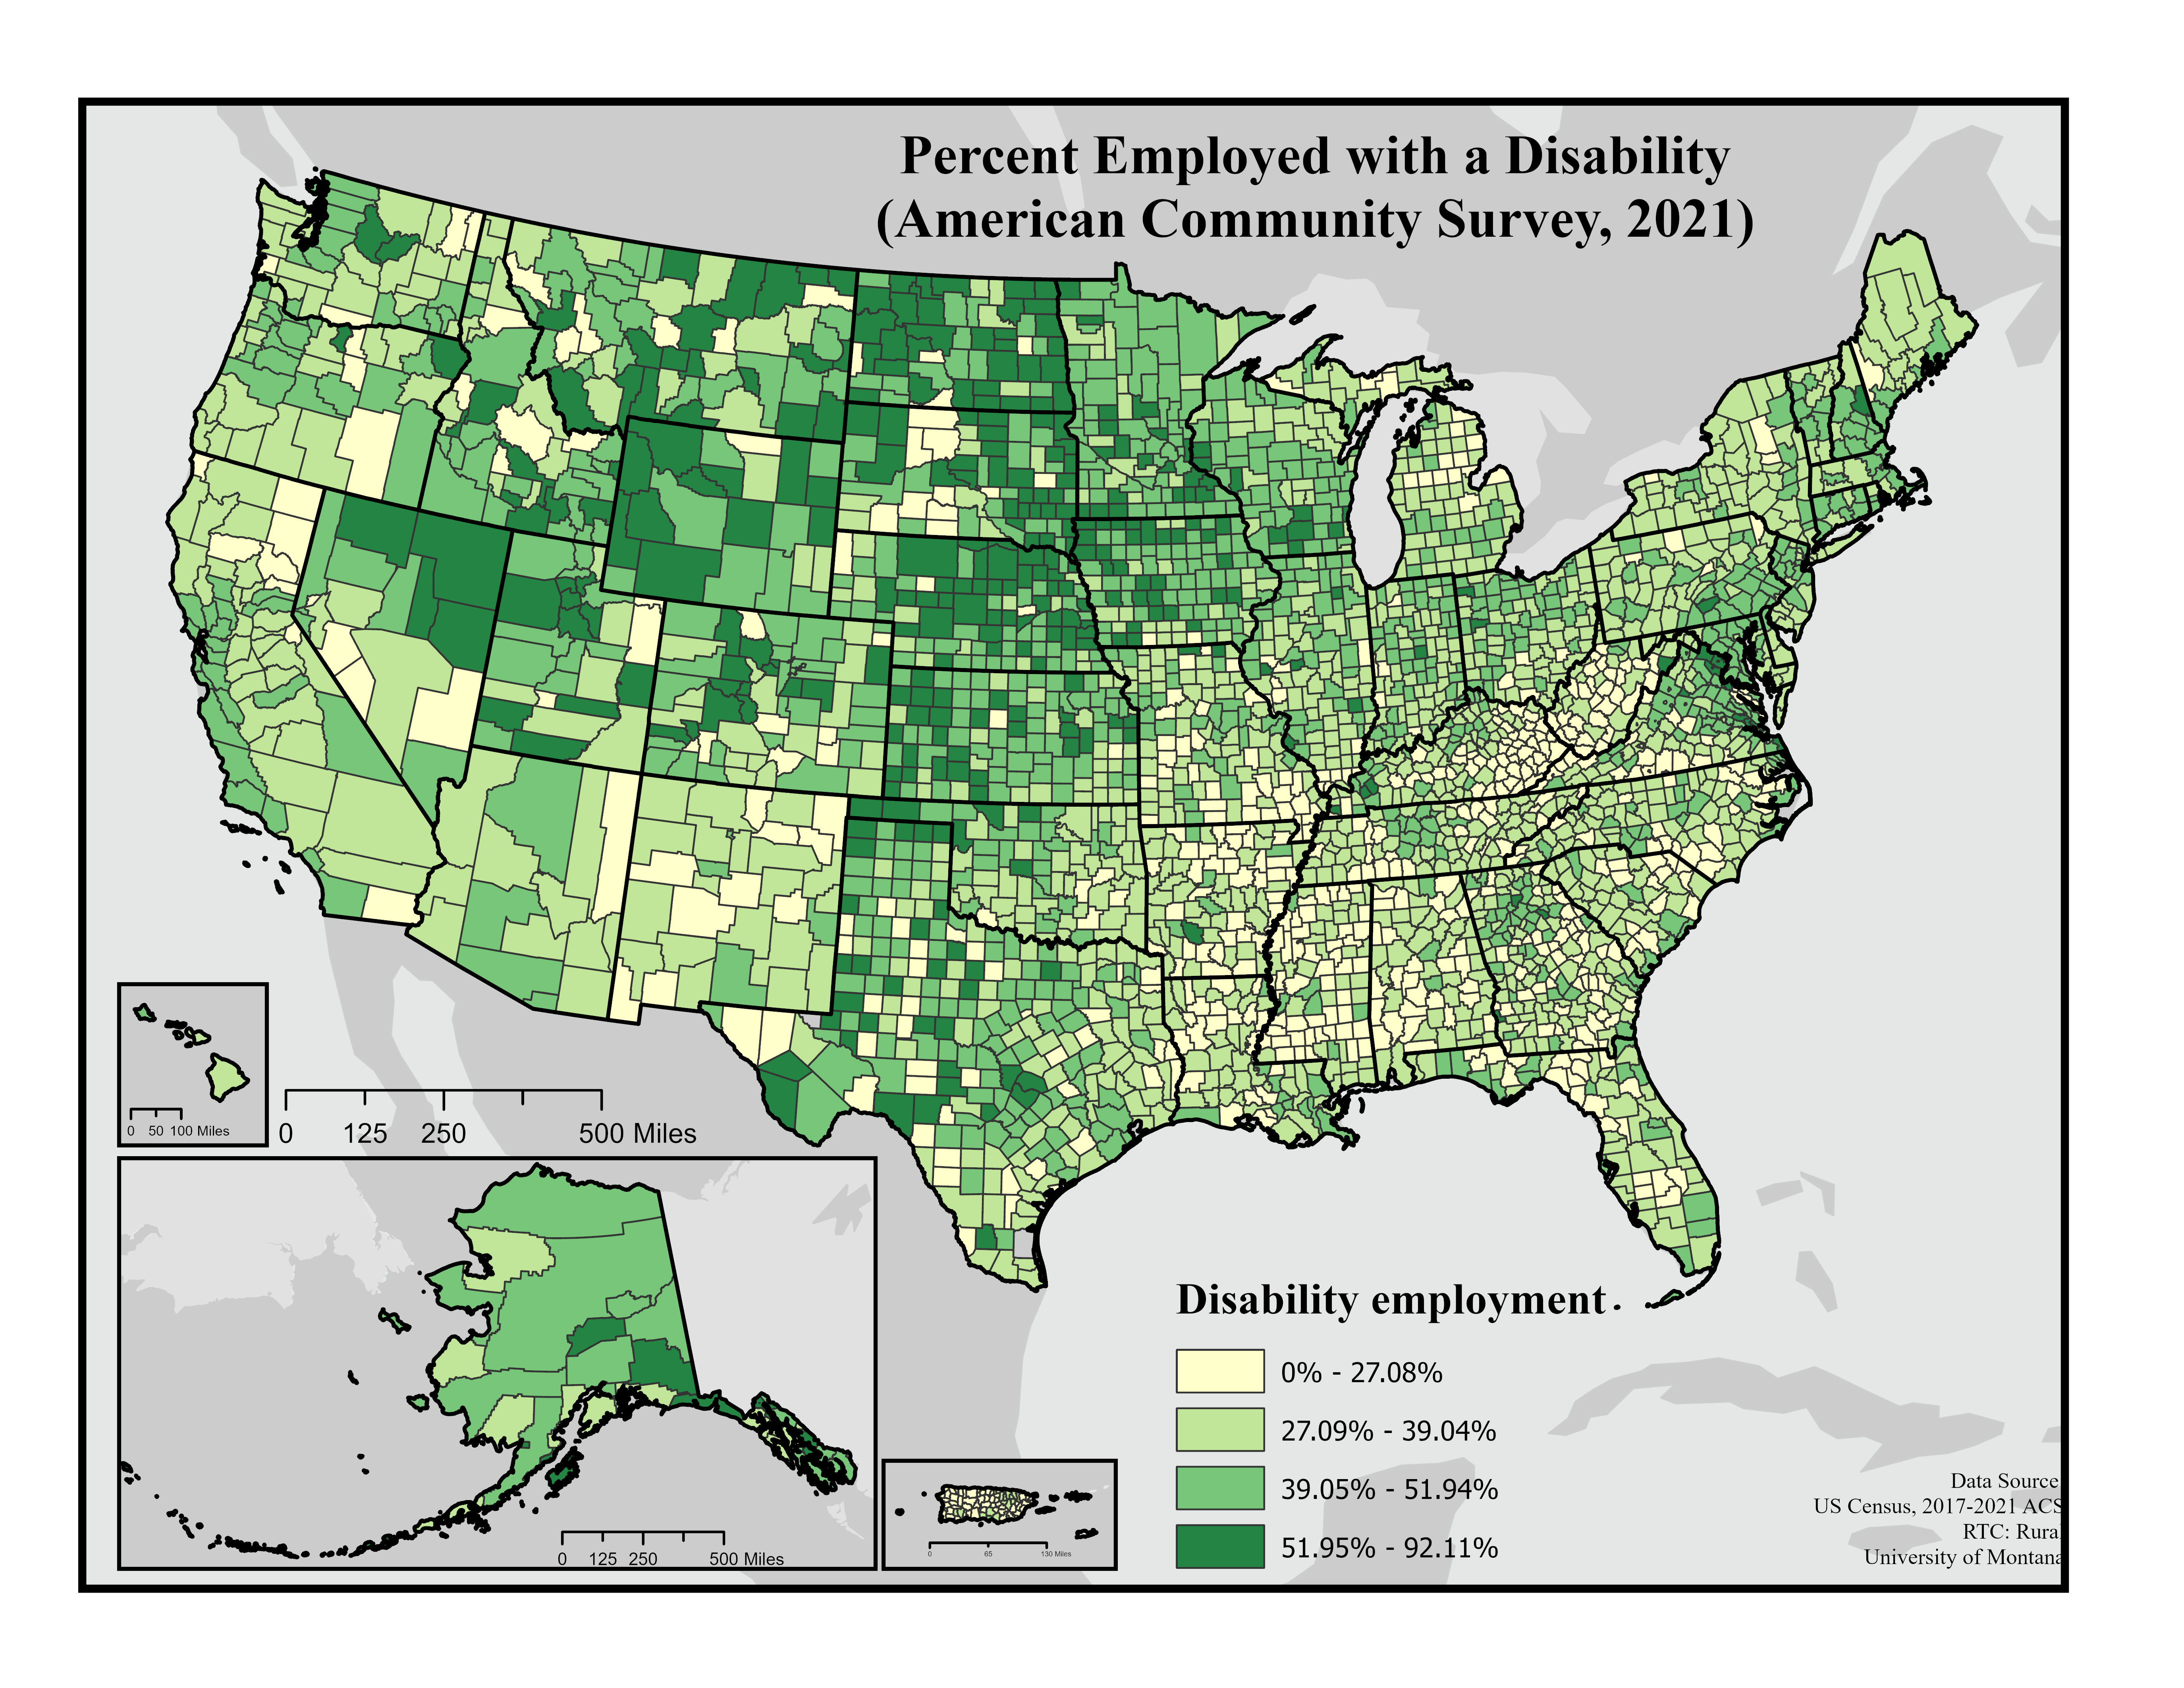 A map of the United States counties showing the percentage of people with disabilities who are employed in each county in four shades of light yellow to dark green. Counties with percentages of 0% to 27.08% are light yellow, then in light green are counties with percentages of 27.09% to 39.04%, then in darker green percentages of 39.05%-51.94% and in darkest green counties with percentages from 51.95% to 92.11%. Counties with the highest percentages of employed people with disabilities are found throughout the Great Plains states, across the Rocky Mountain West and throughout Alaska.